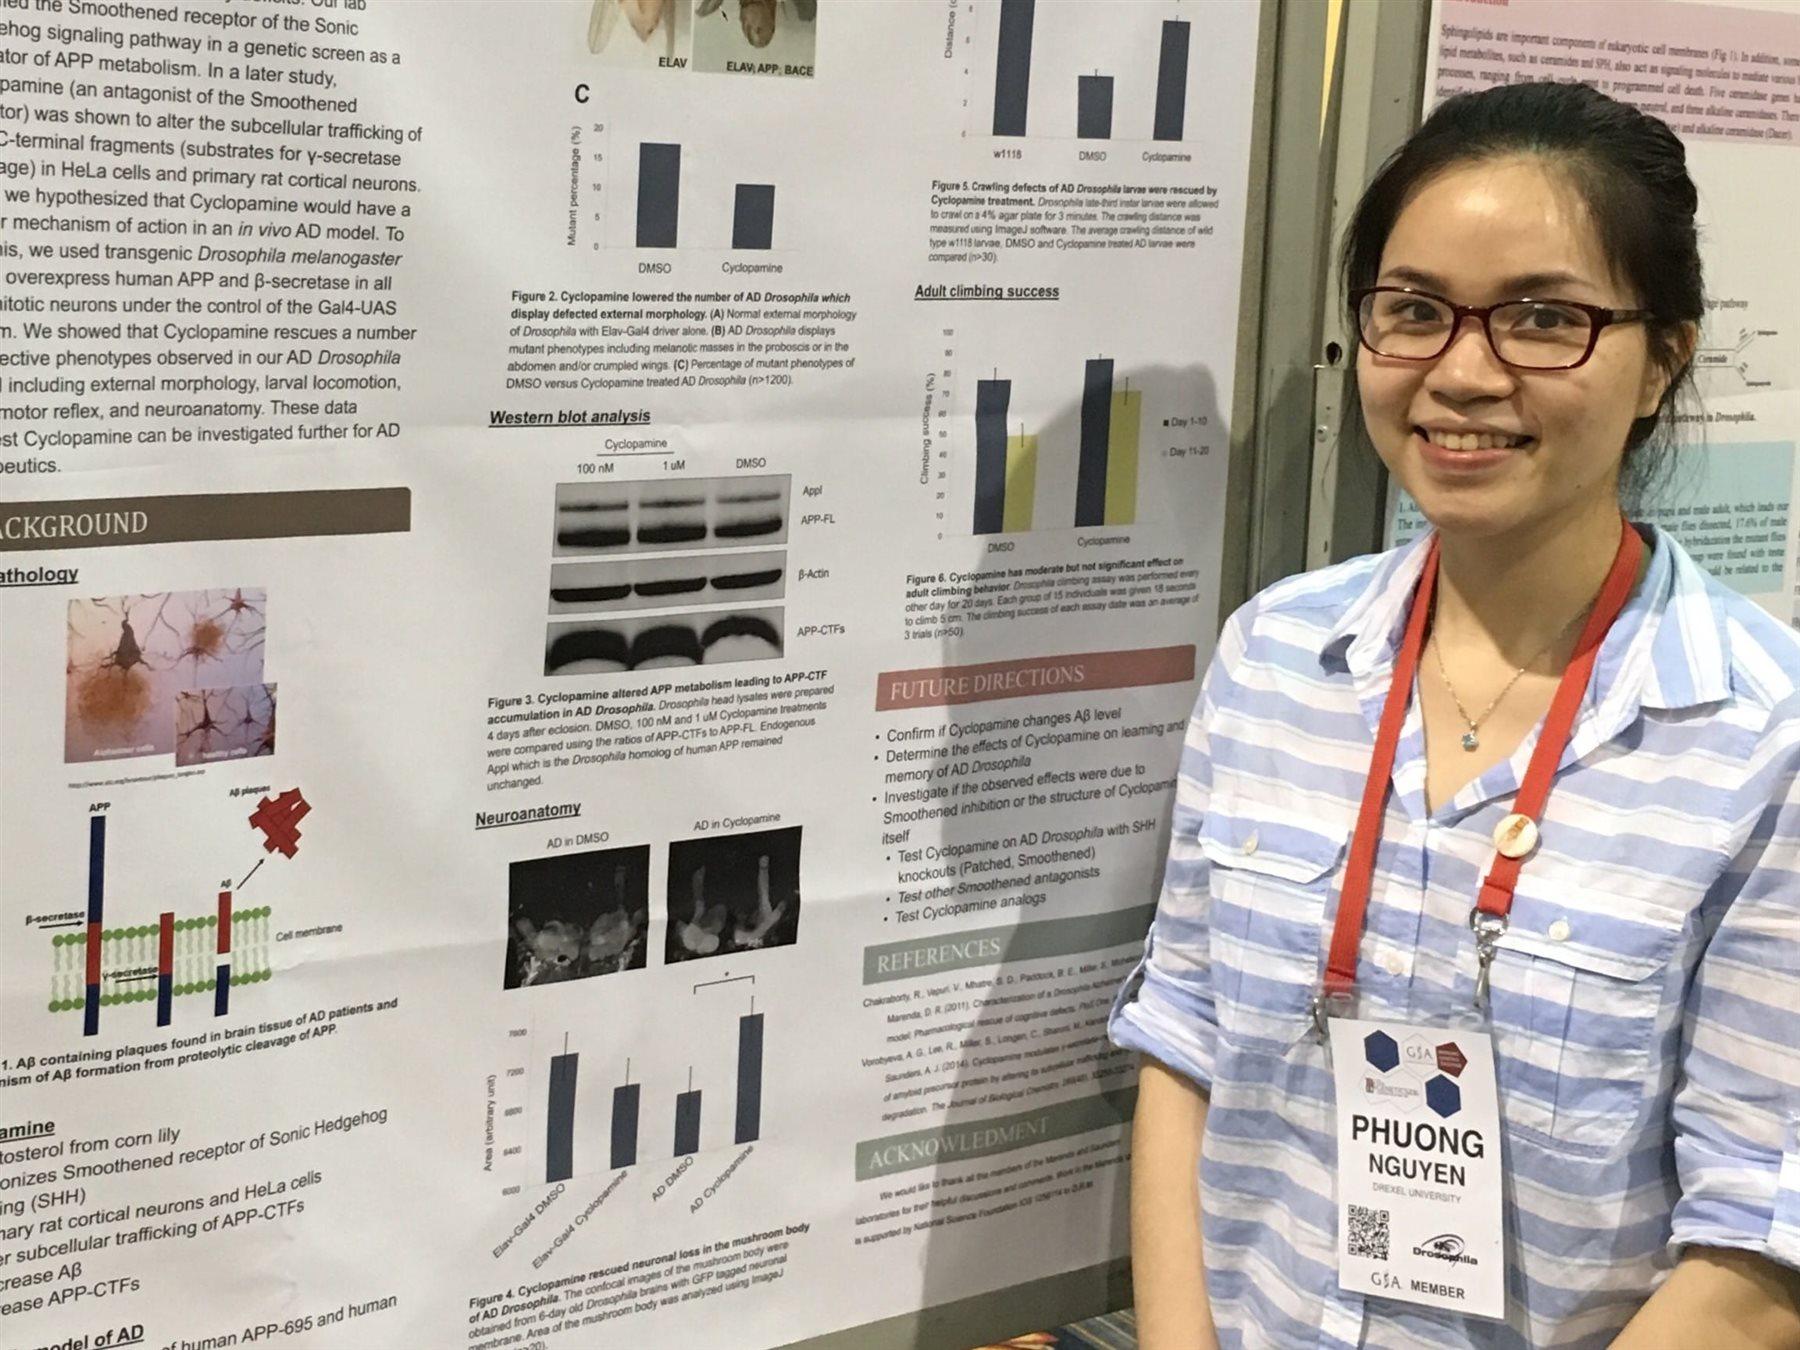 Phuong Nguyen at the Allied Genetics Conference